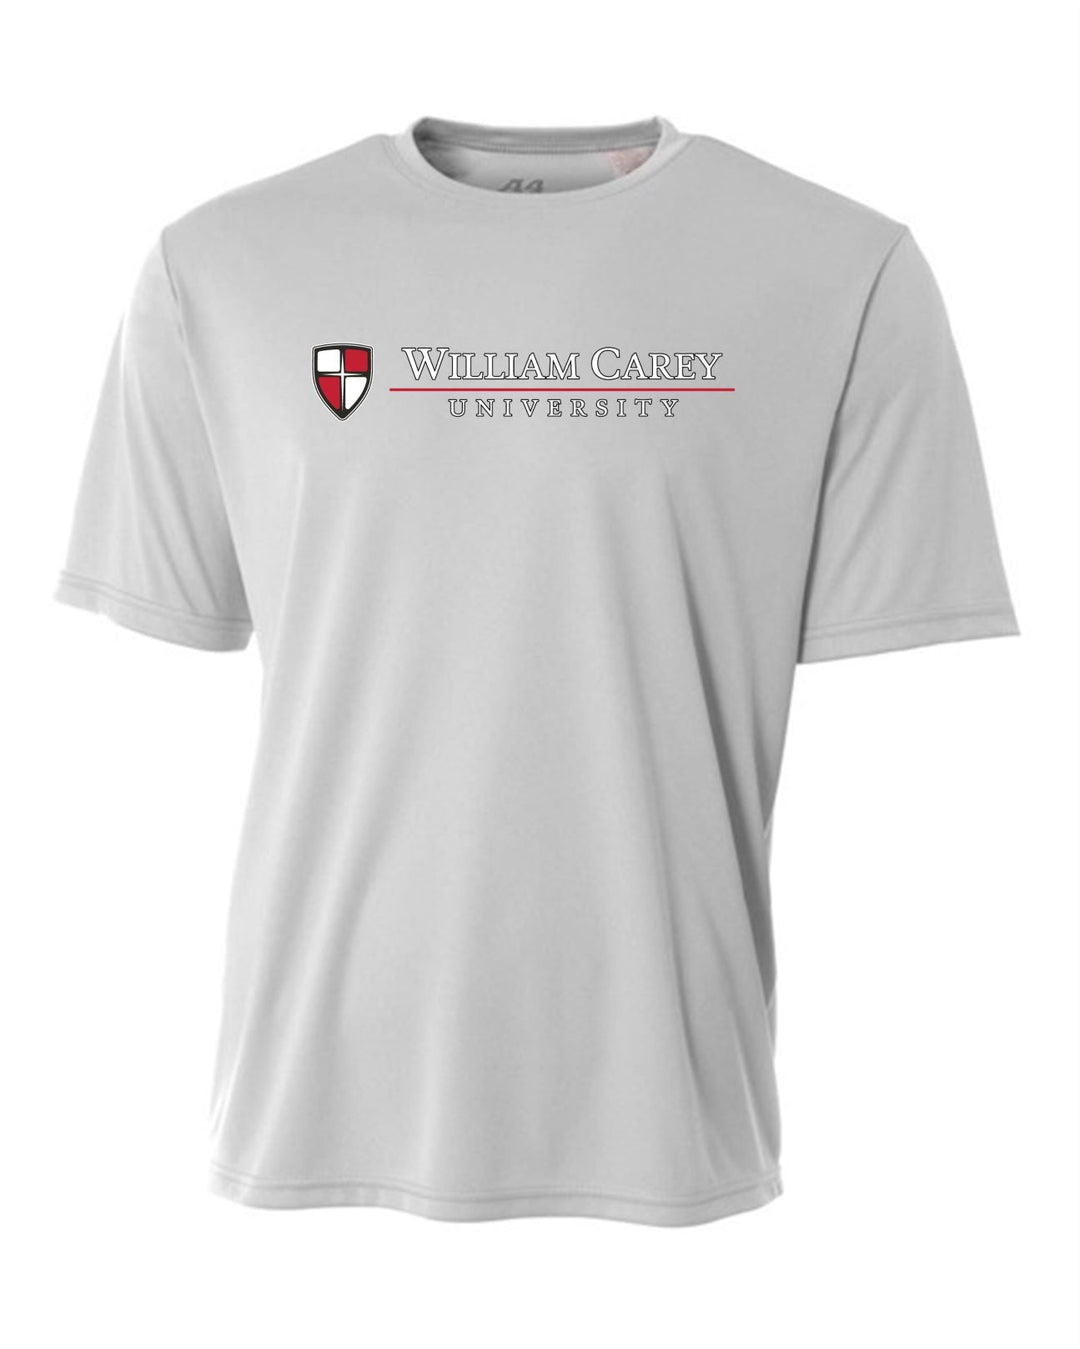 WCU College Of Health Sciences Youth Short-Sleeve Performance Shirt WCU Health Sciences Silver Grey Youth Small - Third Coast Soccer